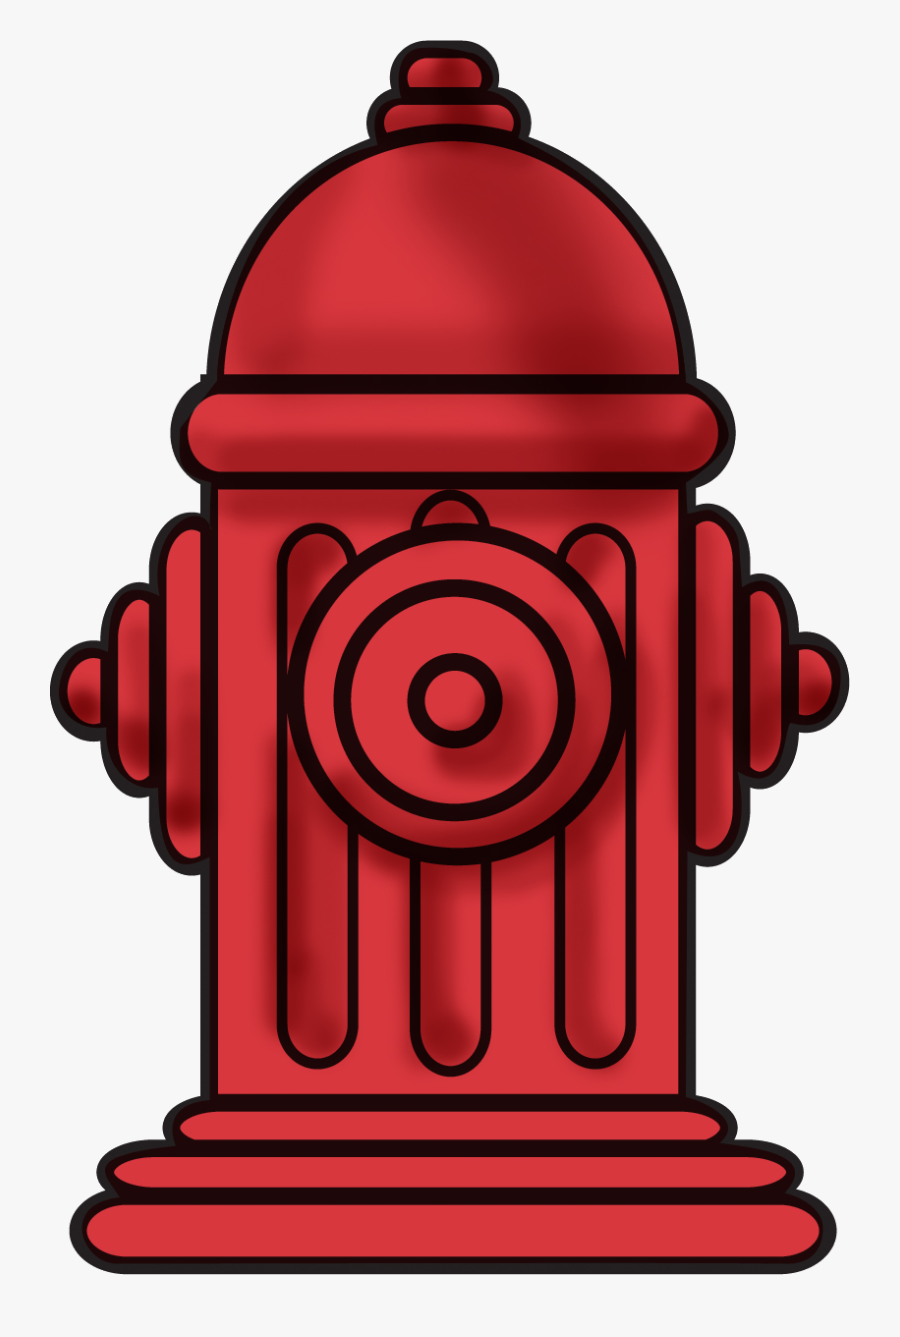 Fire Clipart Hydrant - Clip Art Fire Hydrant, Transparent Clipart